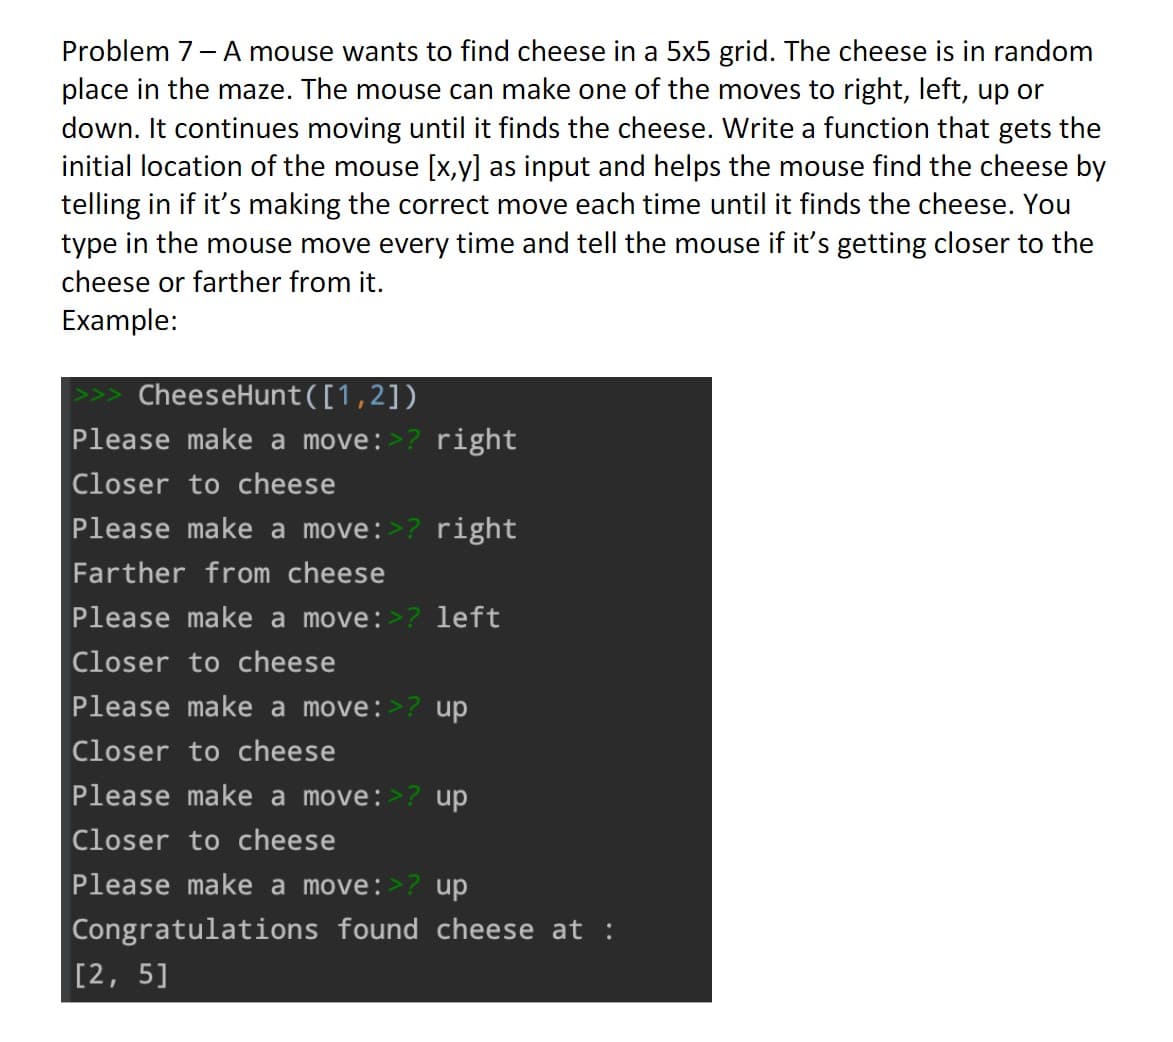 Problem 7 - A mouse wants to find cheese in a 5x5 grid. The cheese is in random
place in the maze. The mouse can make one of the moves to right, left, up or
down. It continues moving until it finds the cheese. Write a function that gets the
initial location of the mouse [x,y] as input and helps the mouse find the cheese by
telling in if it's making the correct move each time until it finds the cheese. You
type in the mouse move every time and tell the mouse if it's getting closer to the
cheese or farther from it.
Example:
CheeseHunt([1,2])
Please make a move:>? right
Closer to cheese
Please make a move:>? right
Farther from cheese
Please make a move:>? left
Closer to cheese
Please make a move:>? up
Closer to cheese
Please make a move:>? up
Closer to cheese
Please make a move:>? up
Congratulations found cheese at :
[2, 5]